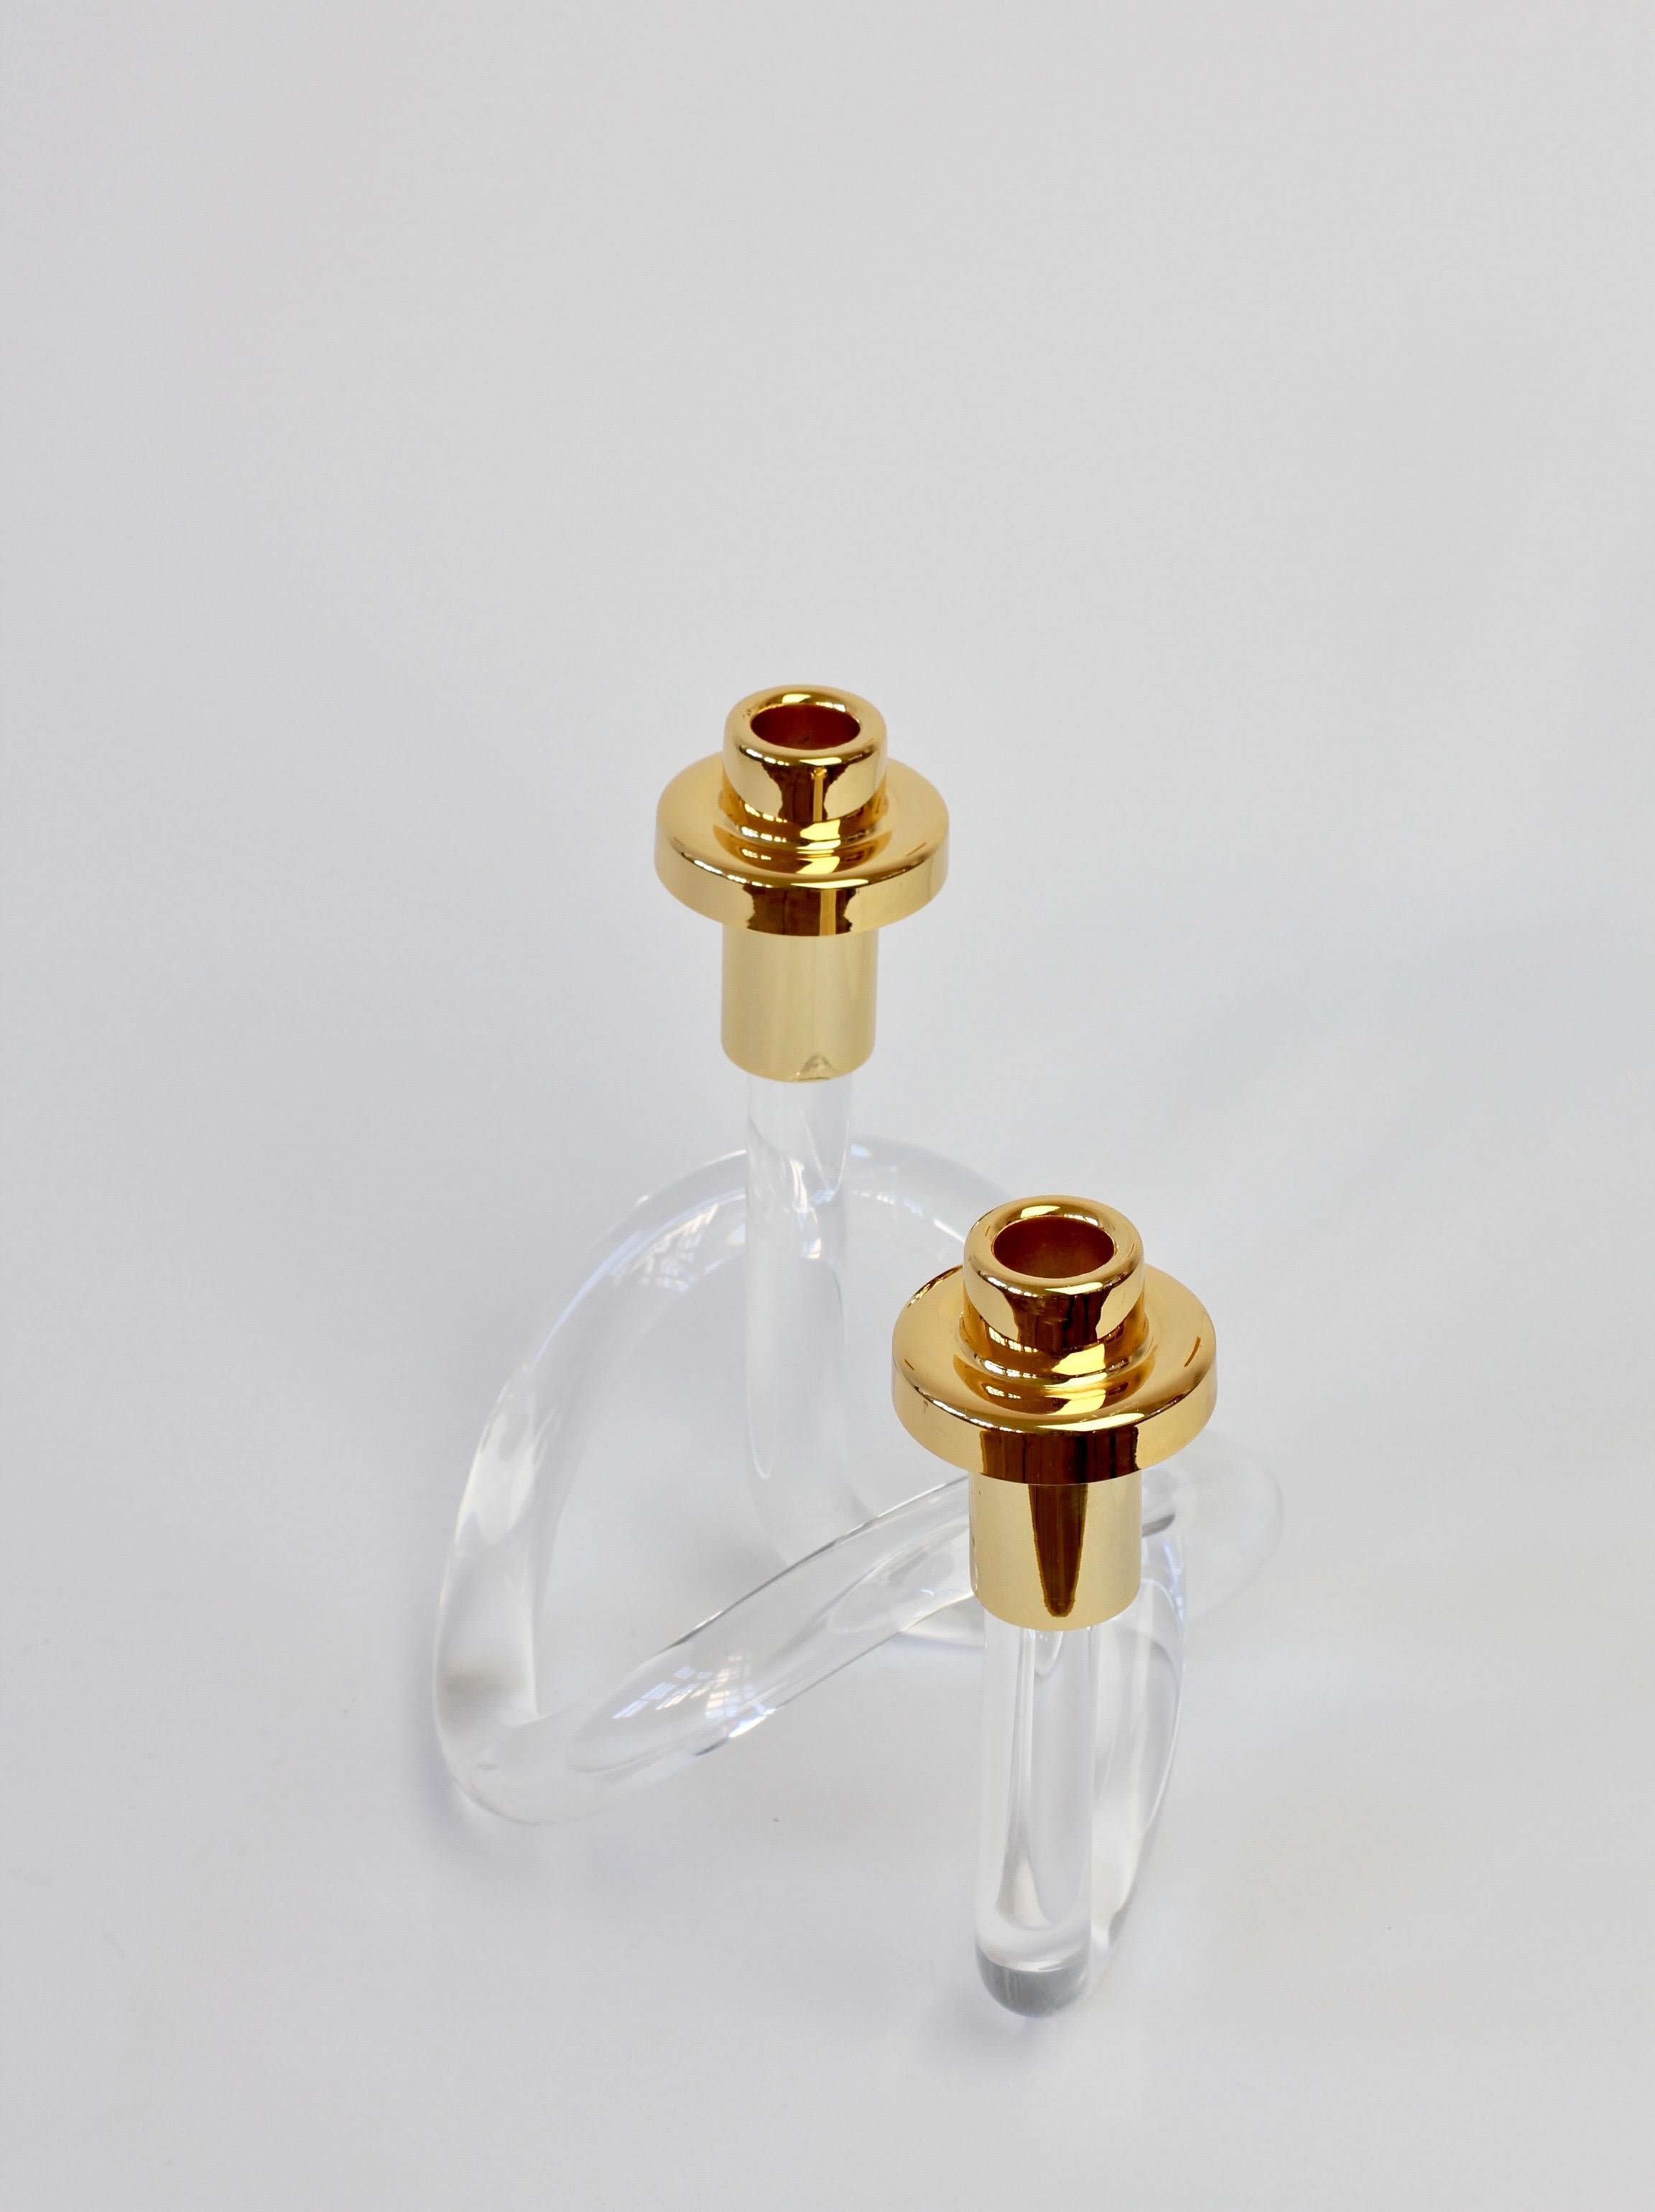 American Gold and Lucite Twisted Pretzel Candlestick Holder/Candelabra by Dorothy Thorpe